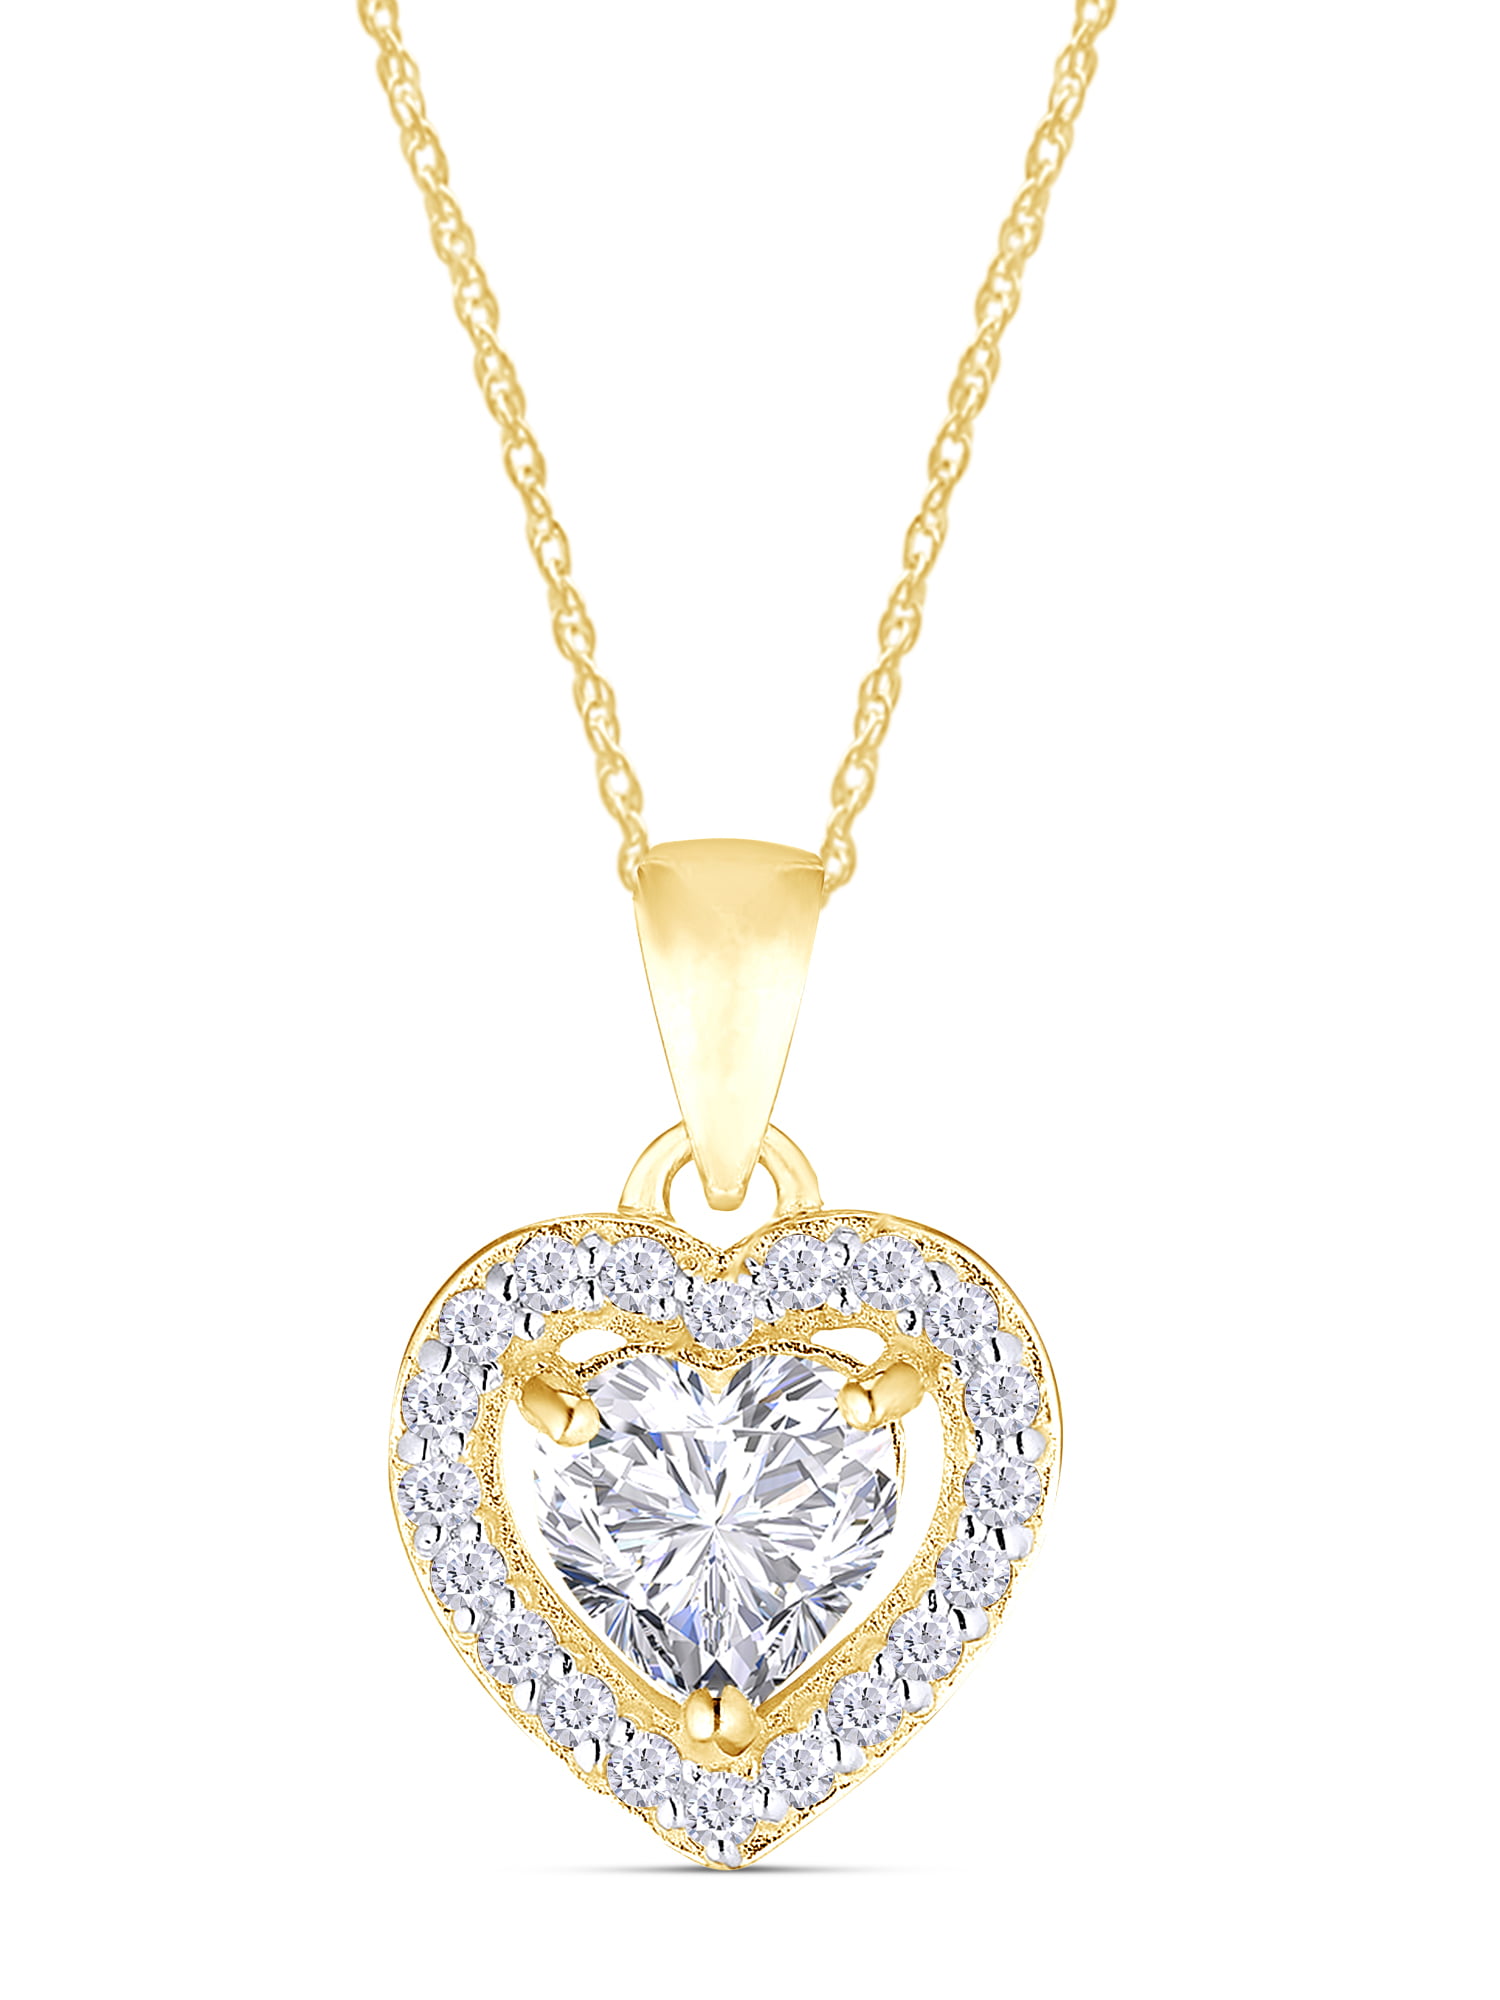 Wishrocks Round Cut White Cubic Zirconia Open Heart Pendant Necklace in Sterling Silver